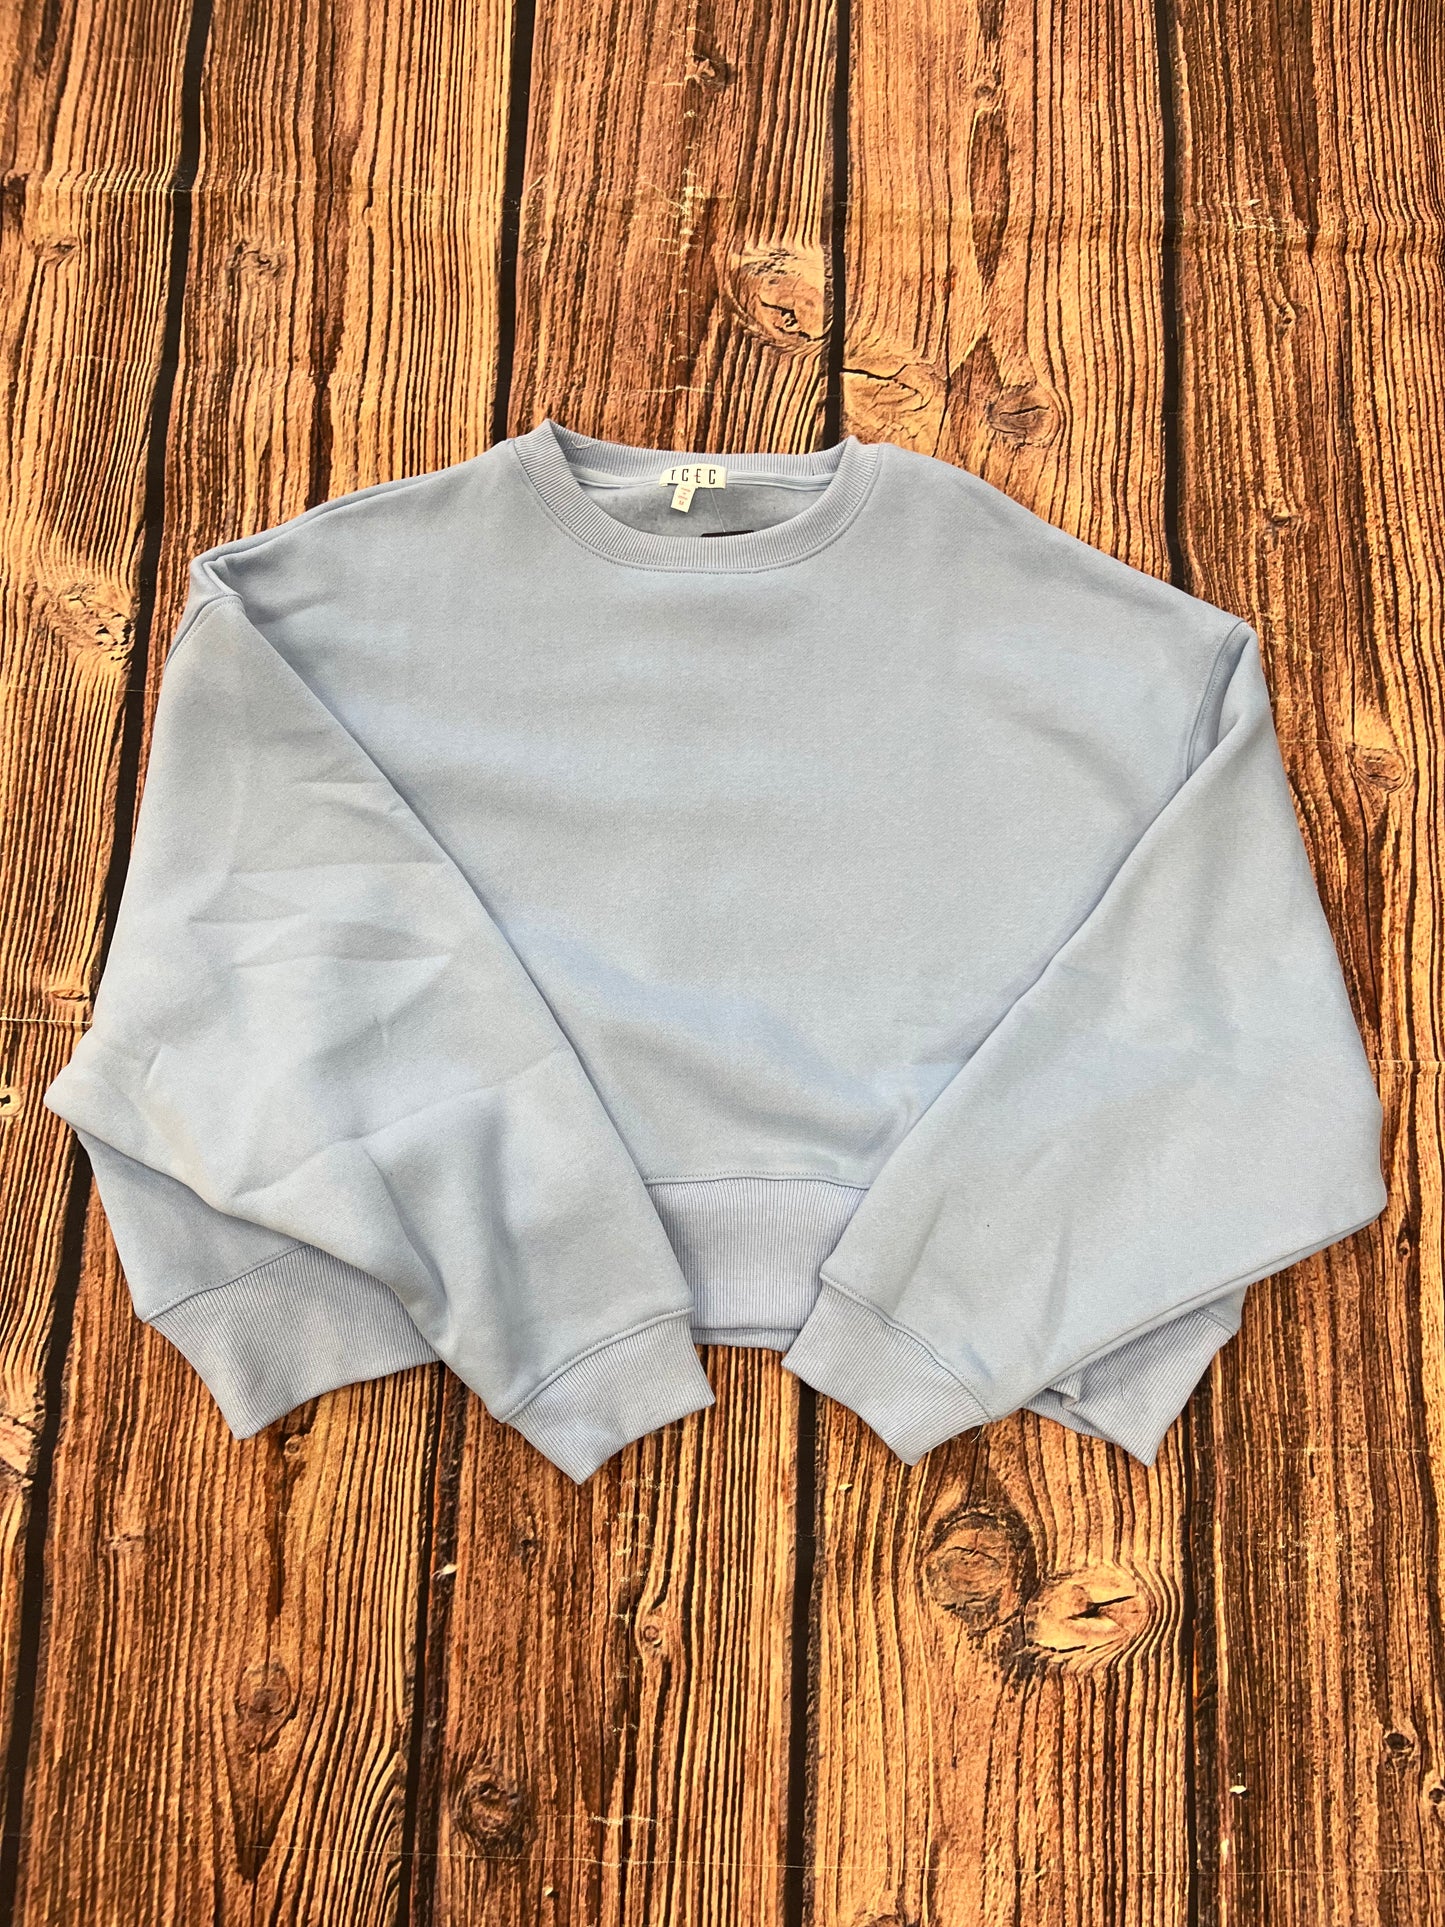 Snuggle Me Cropped Sweater - Baby Blue